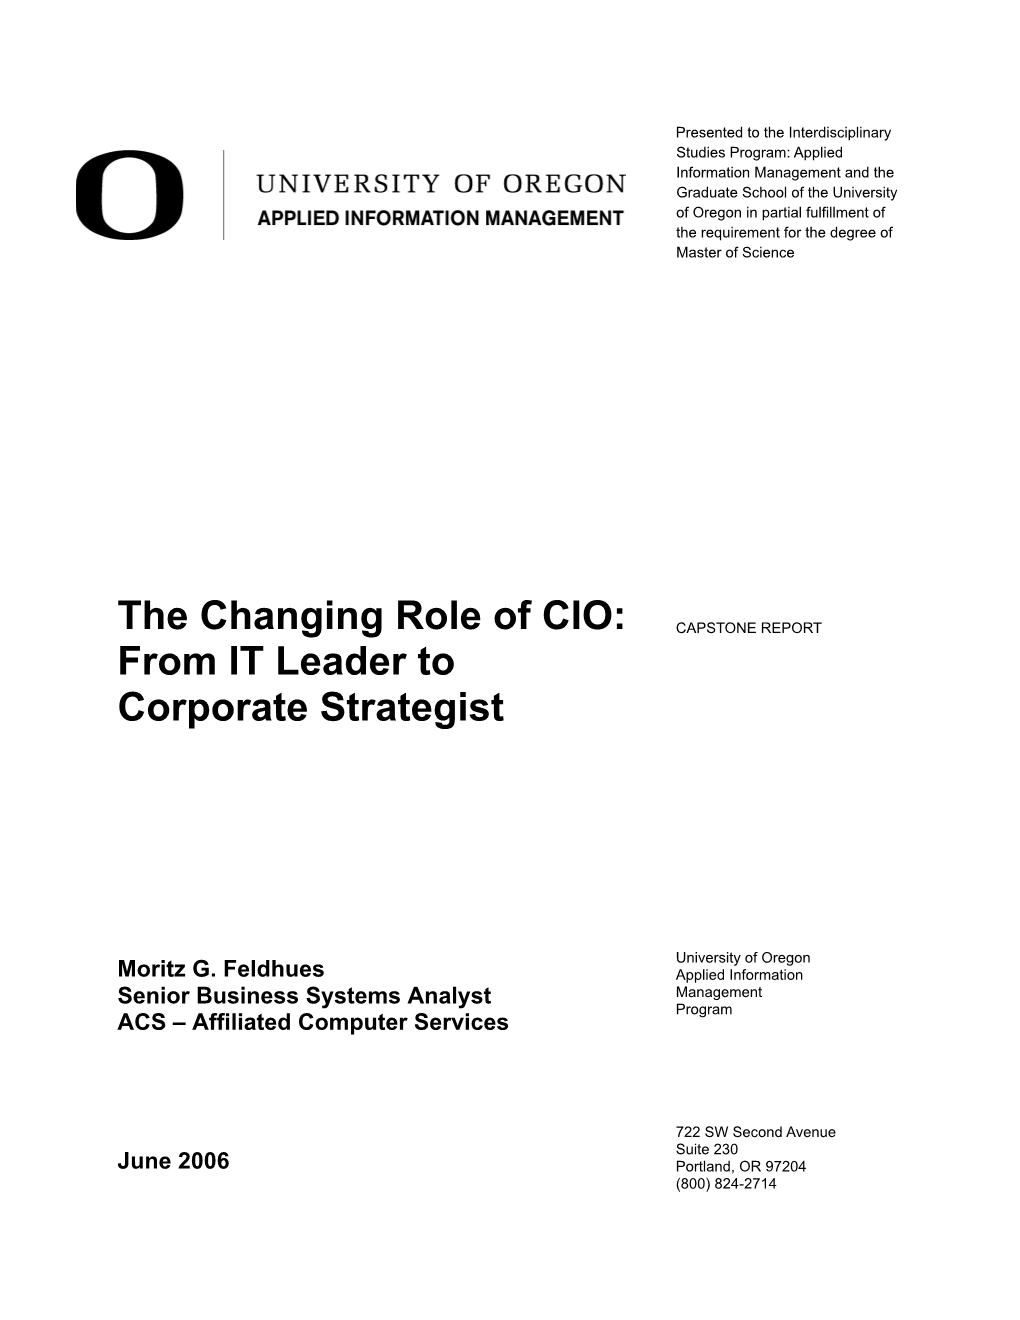 The Changing Role of CIO: CAPSTONE REPORT from IT Leader to Corporate Strategist